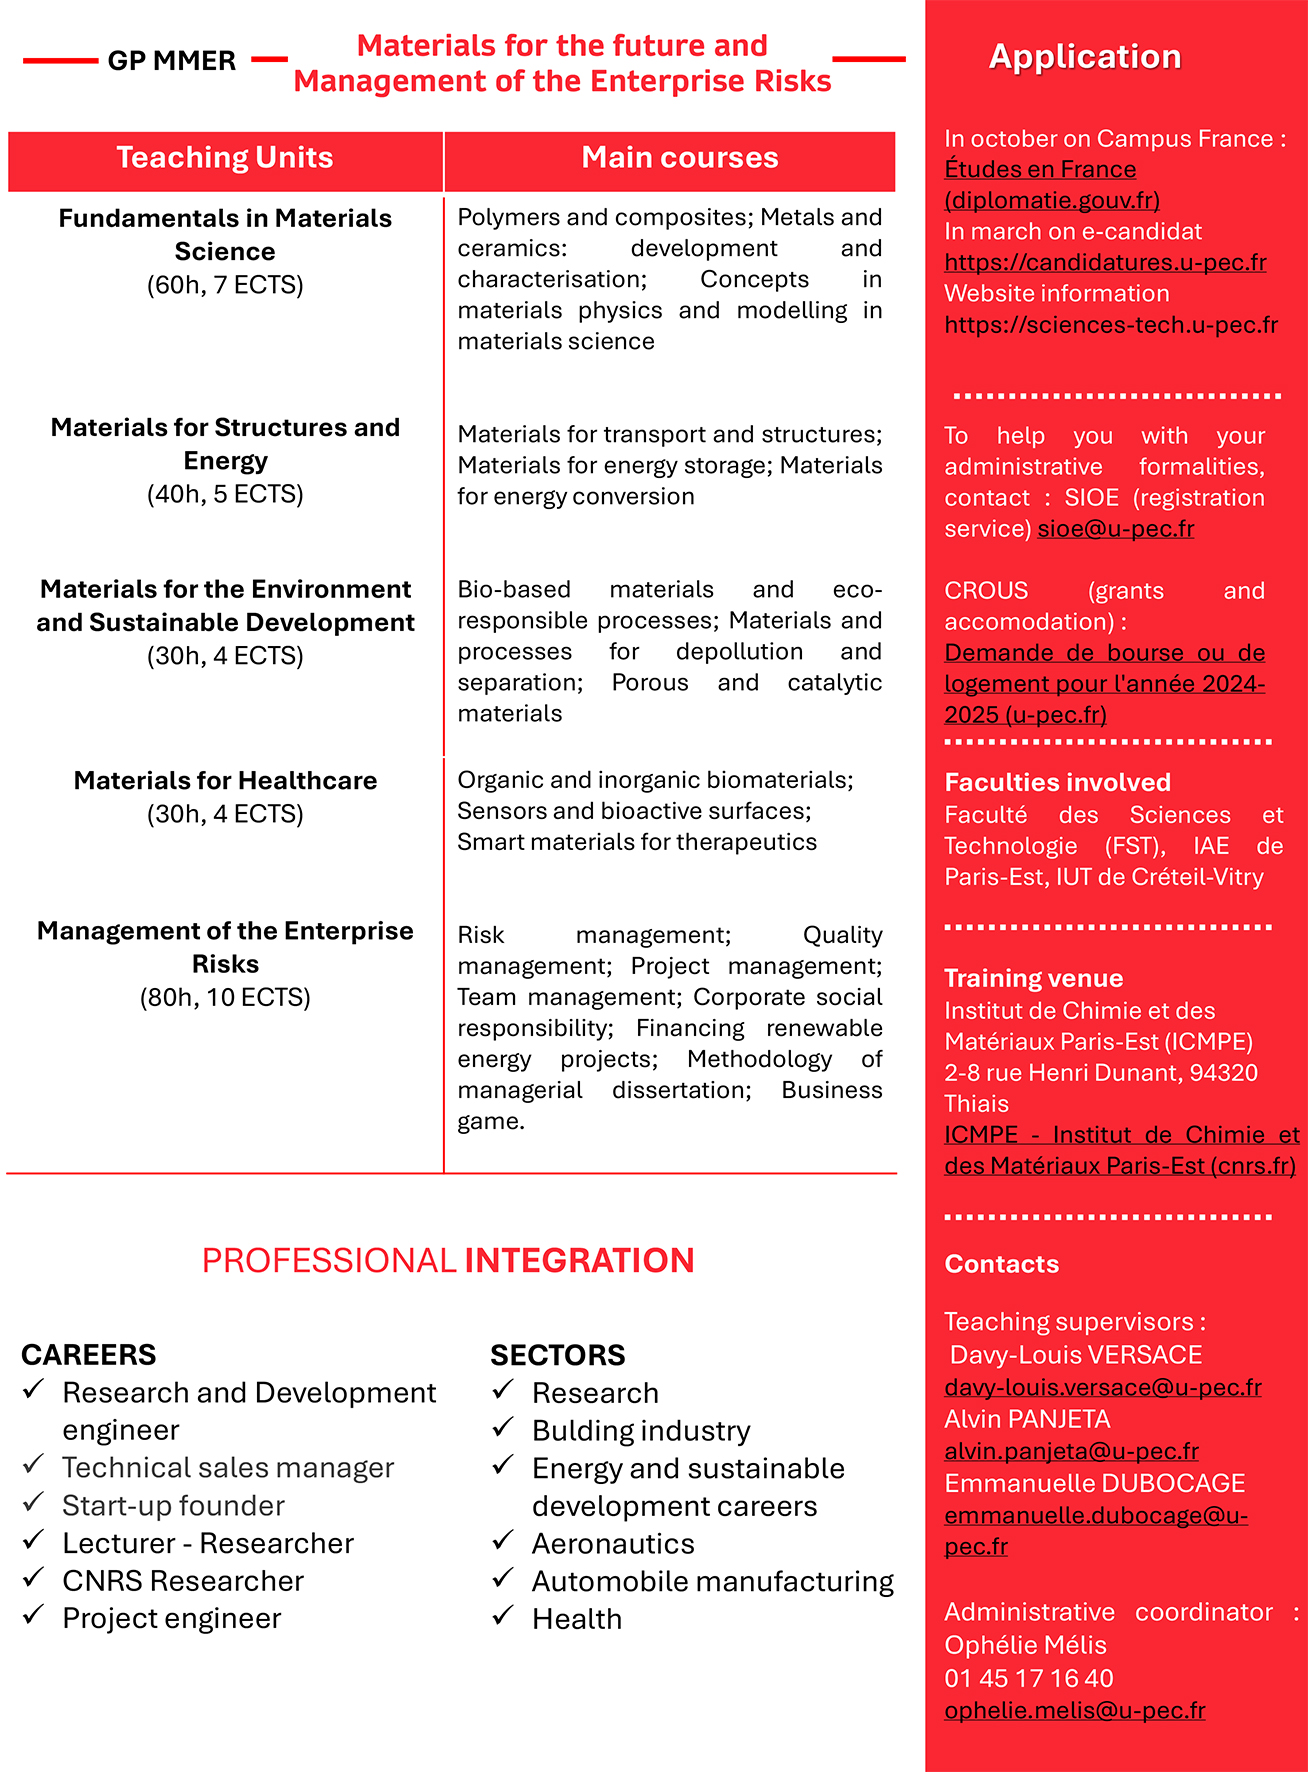 Graduate Program Materials for the future and Management of the Enterprise Risks